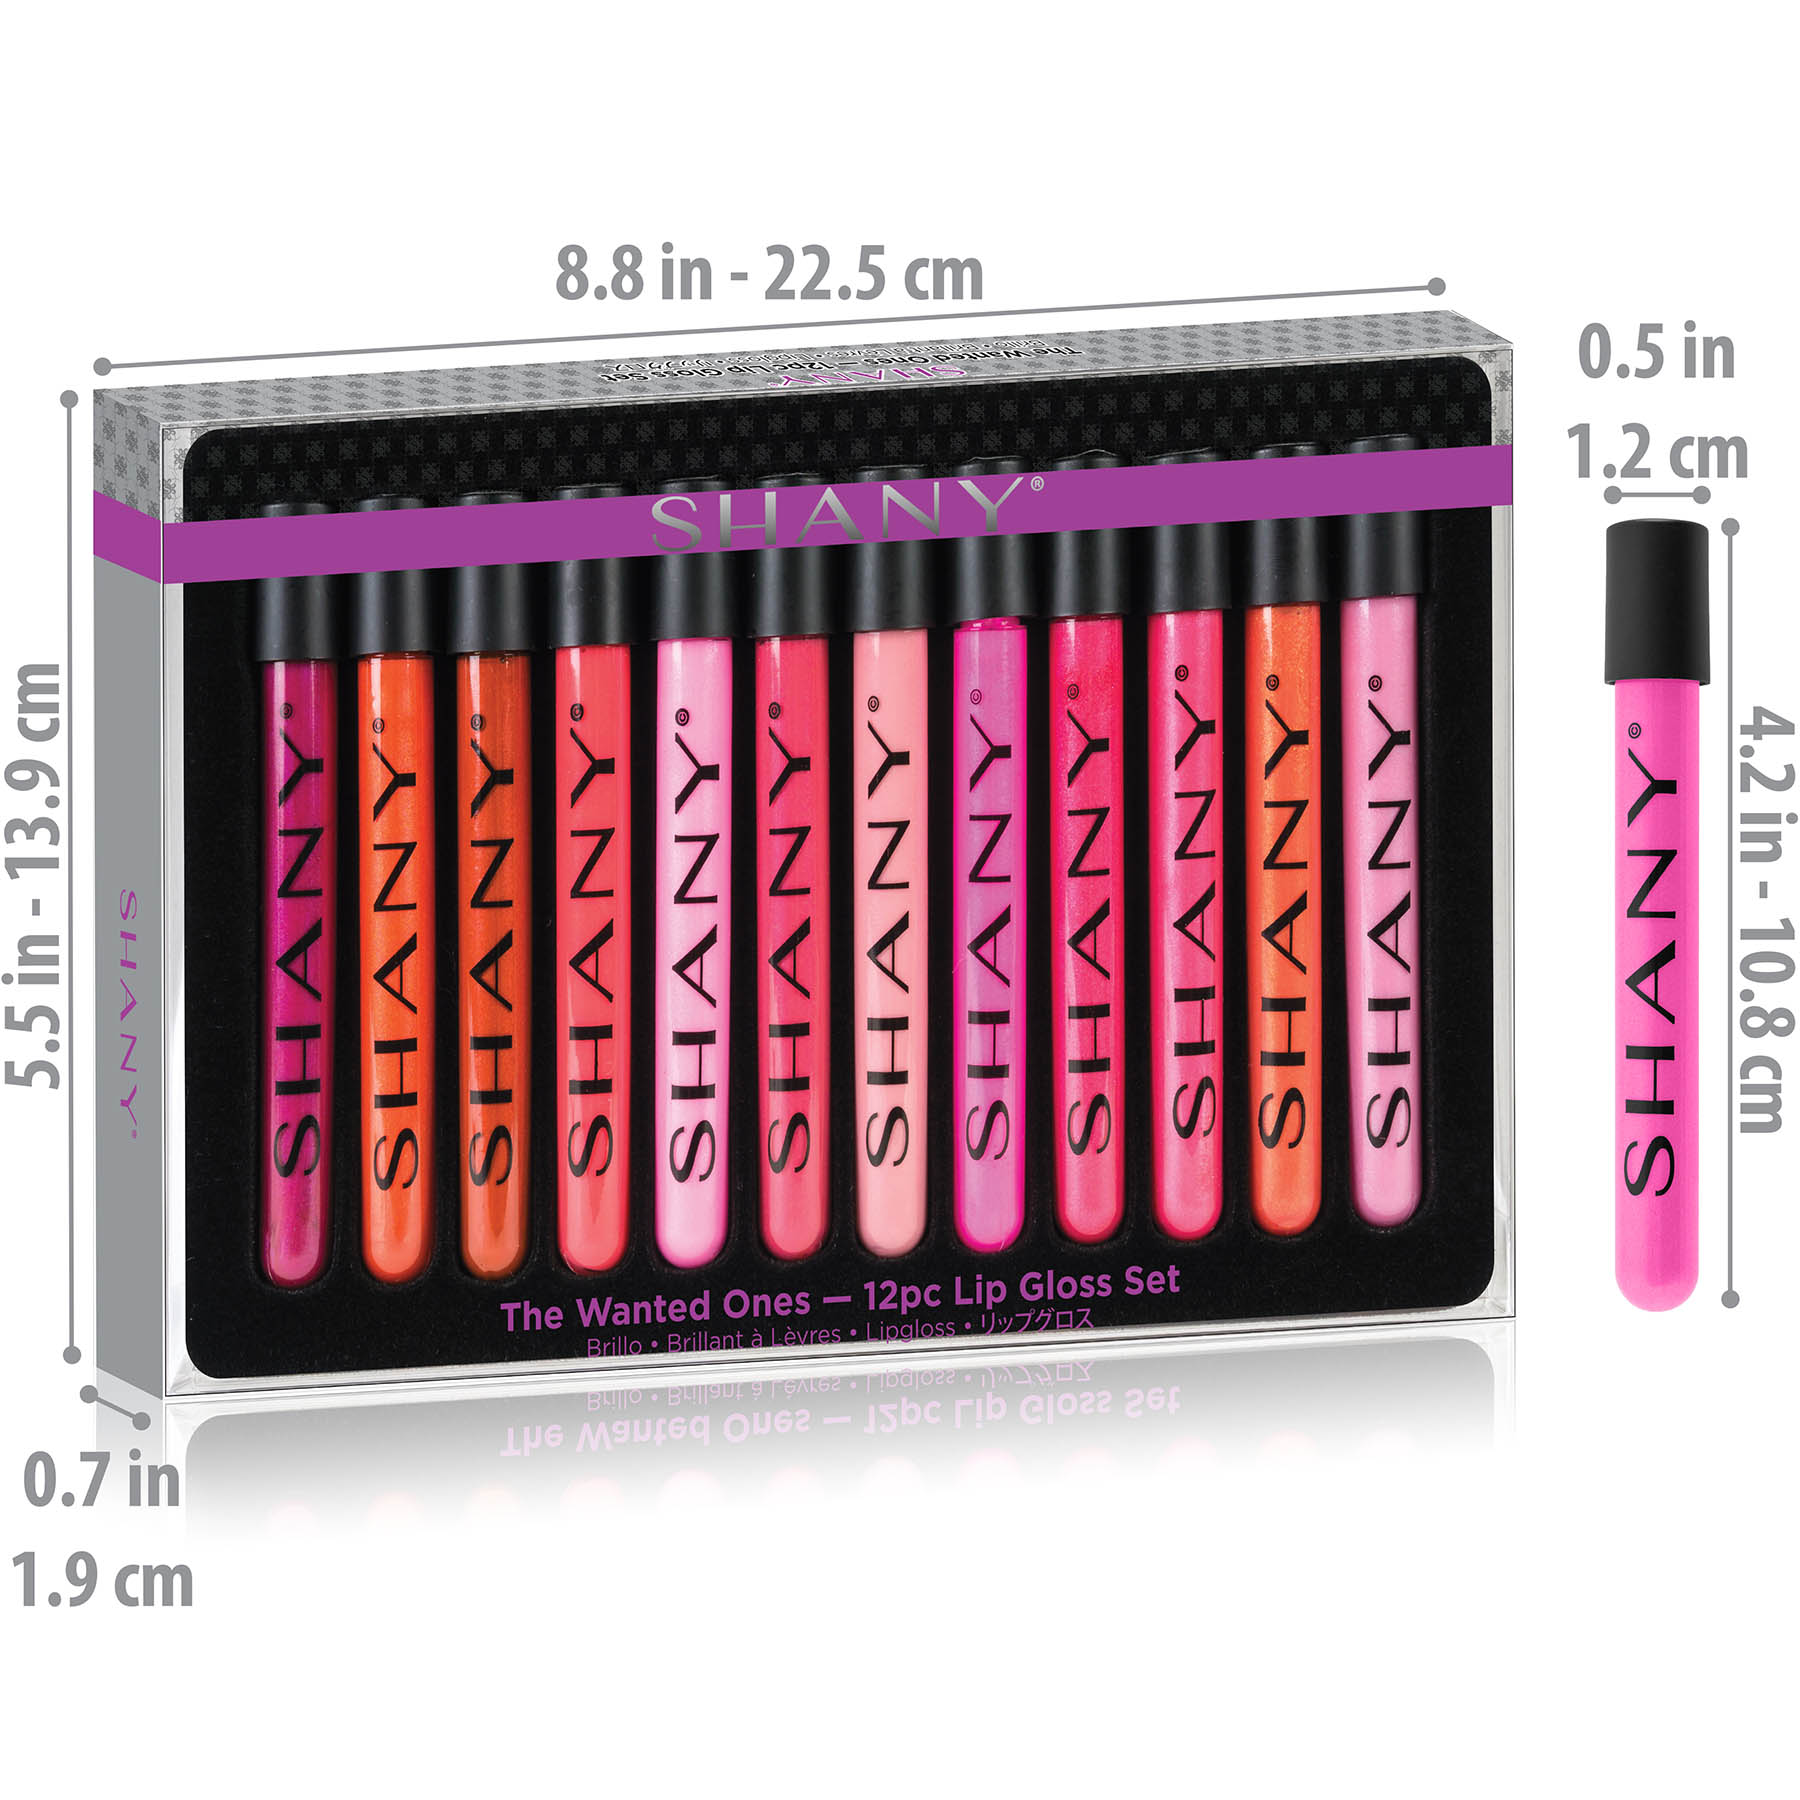 SHANY The Wanted Ones - 12 Piece Lip Gloss Set with Aloe Vera and Vitamin E - image 4 of 5